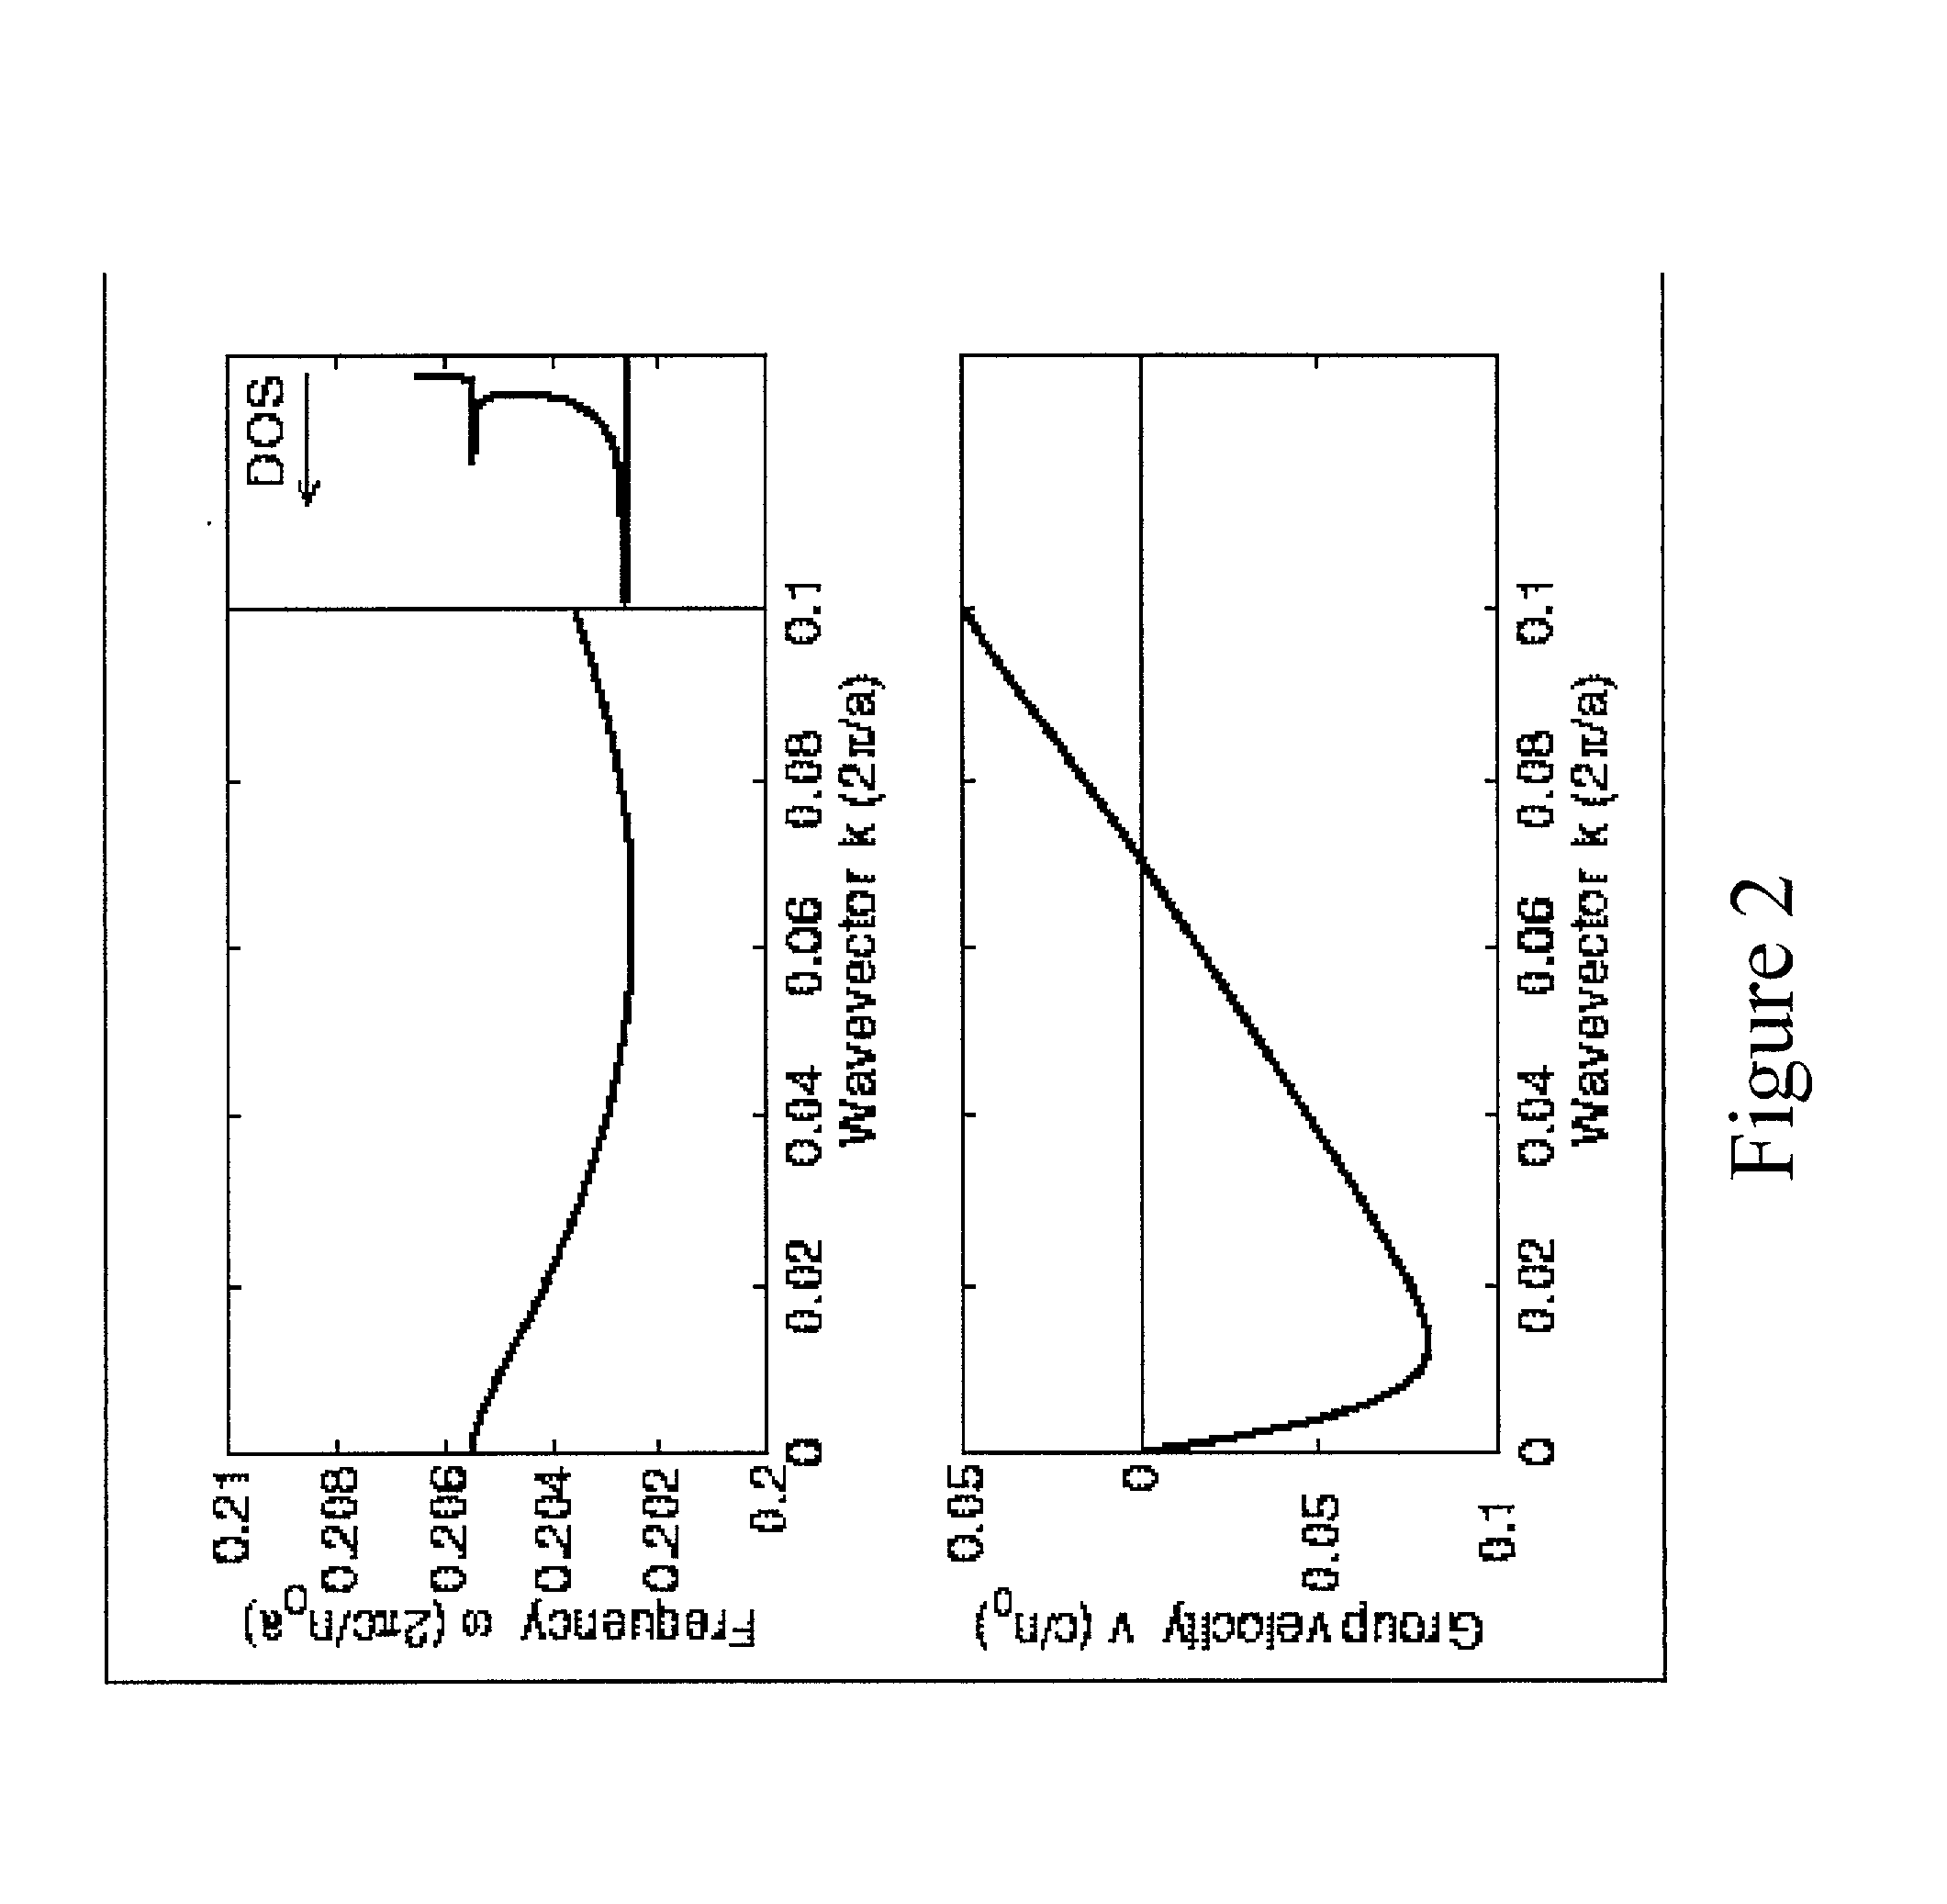 Dielectric waveguide with transverse index variation that support a zero group velocity mode at a non-zero longitudinal wavevector